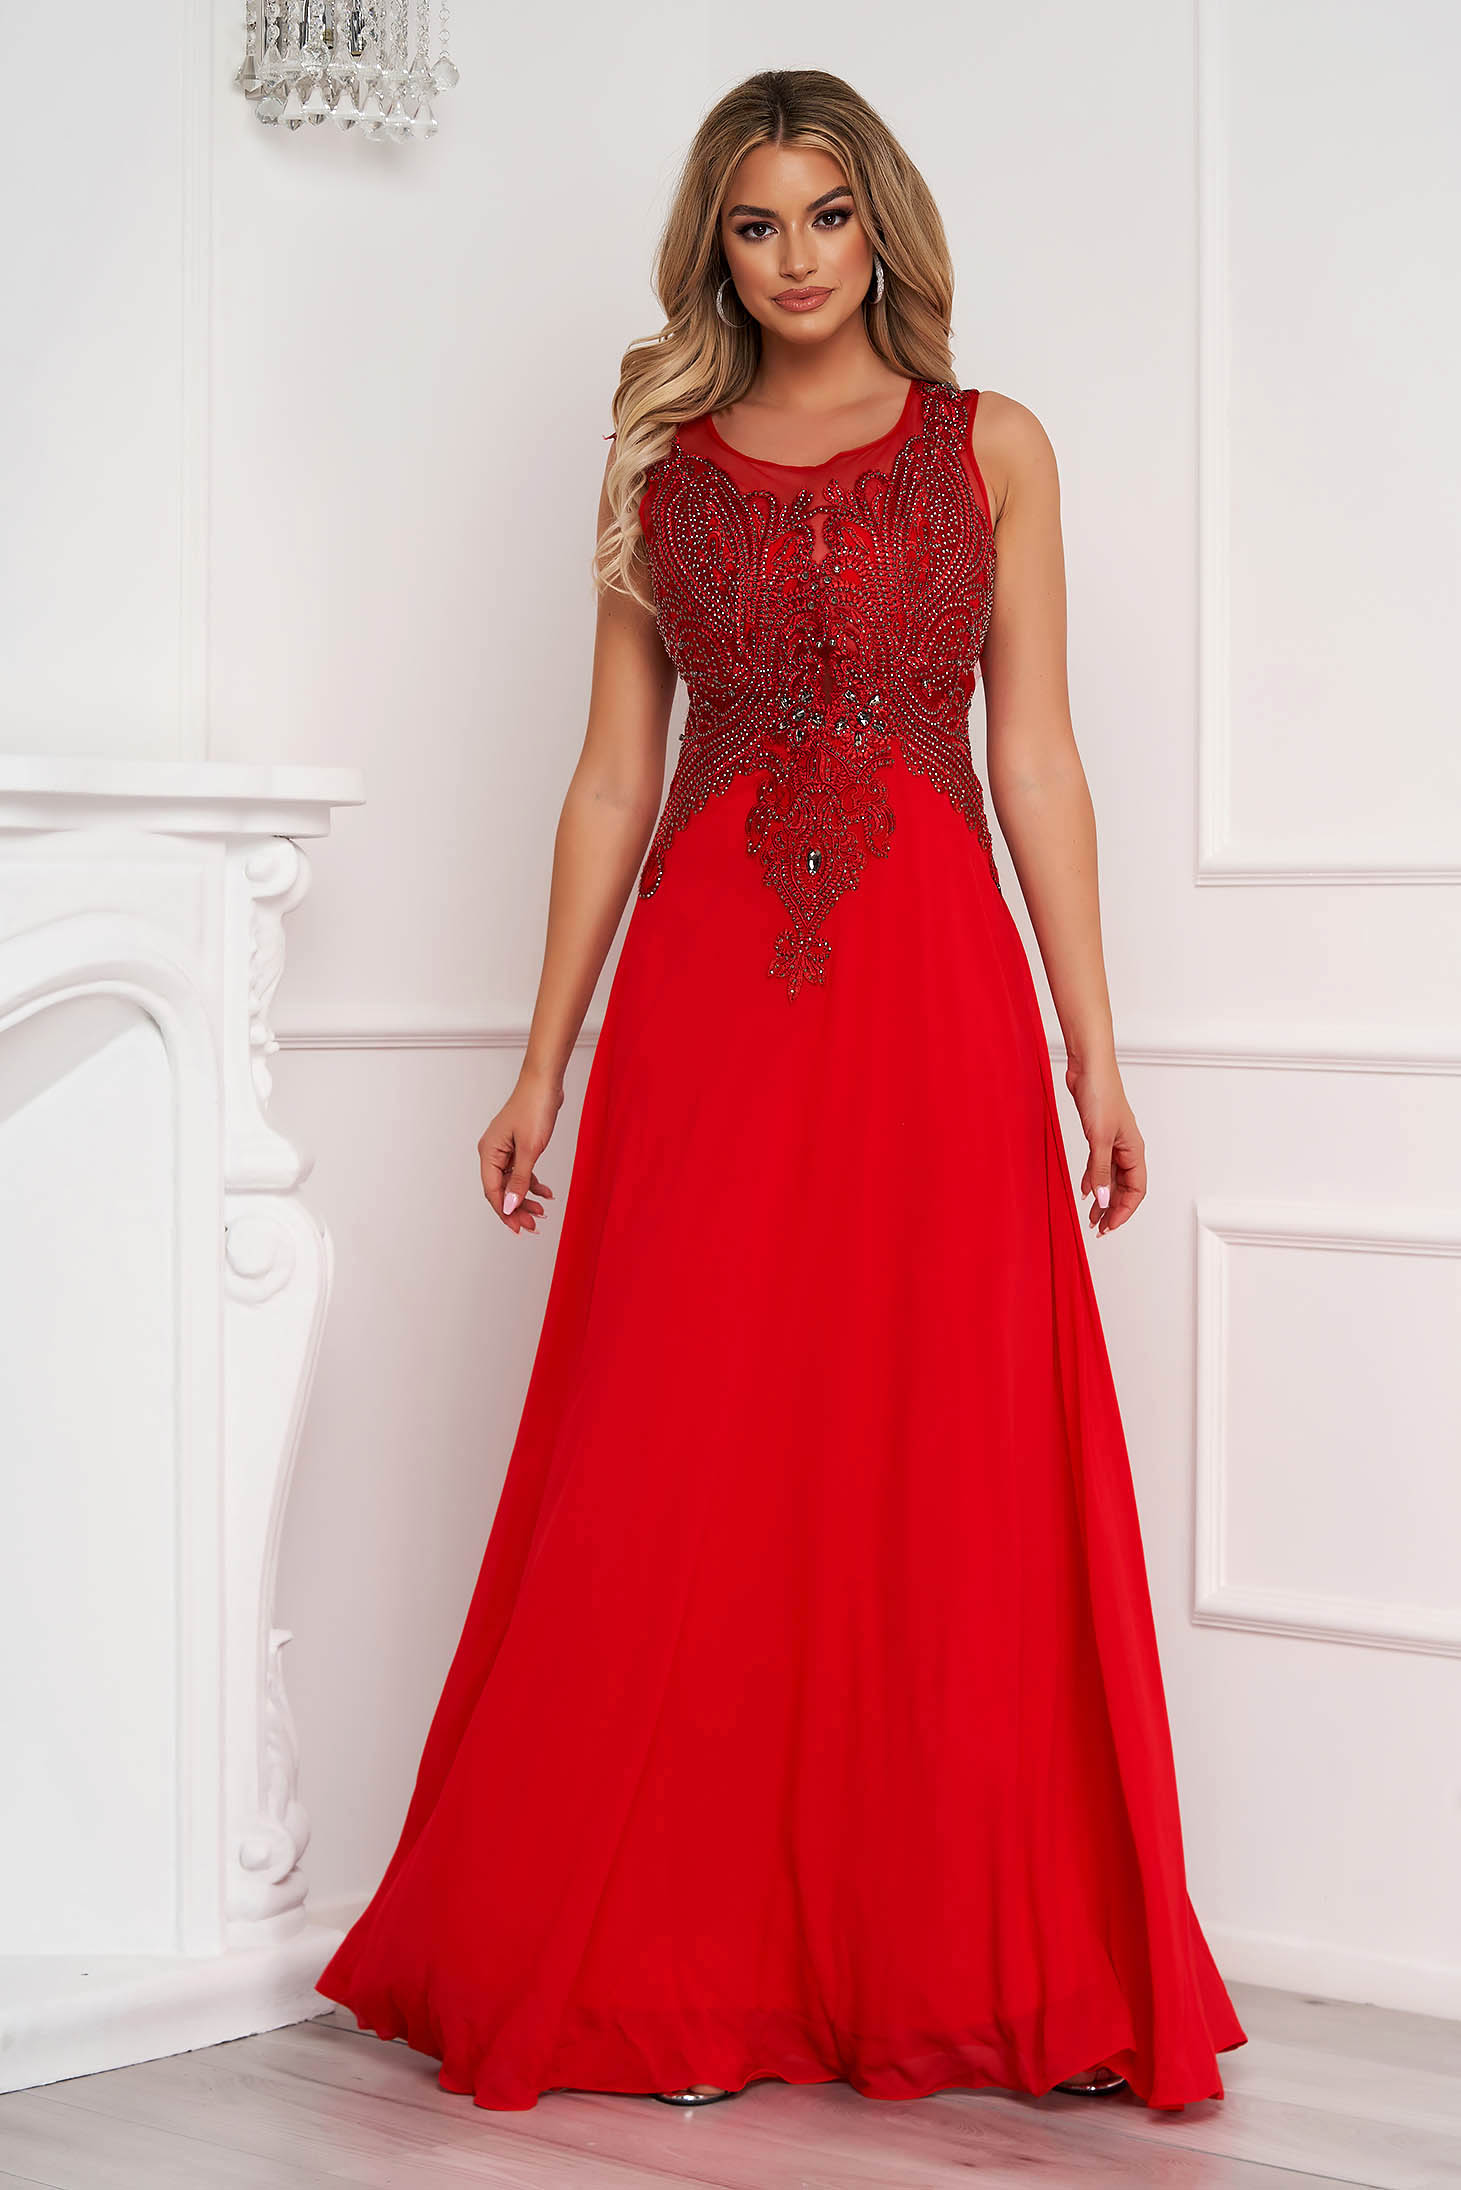 Red dress long occasional cloche from veil fabric sleeveless with embroidery details with embellished accessories